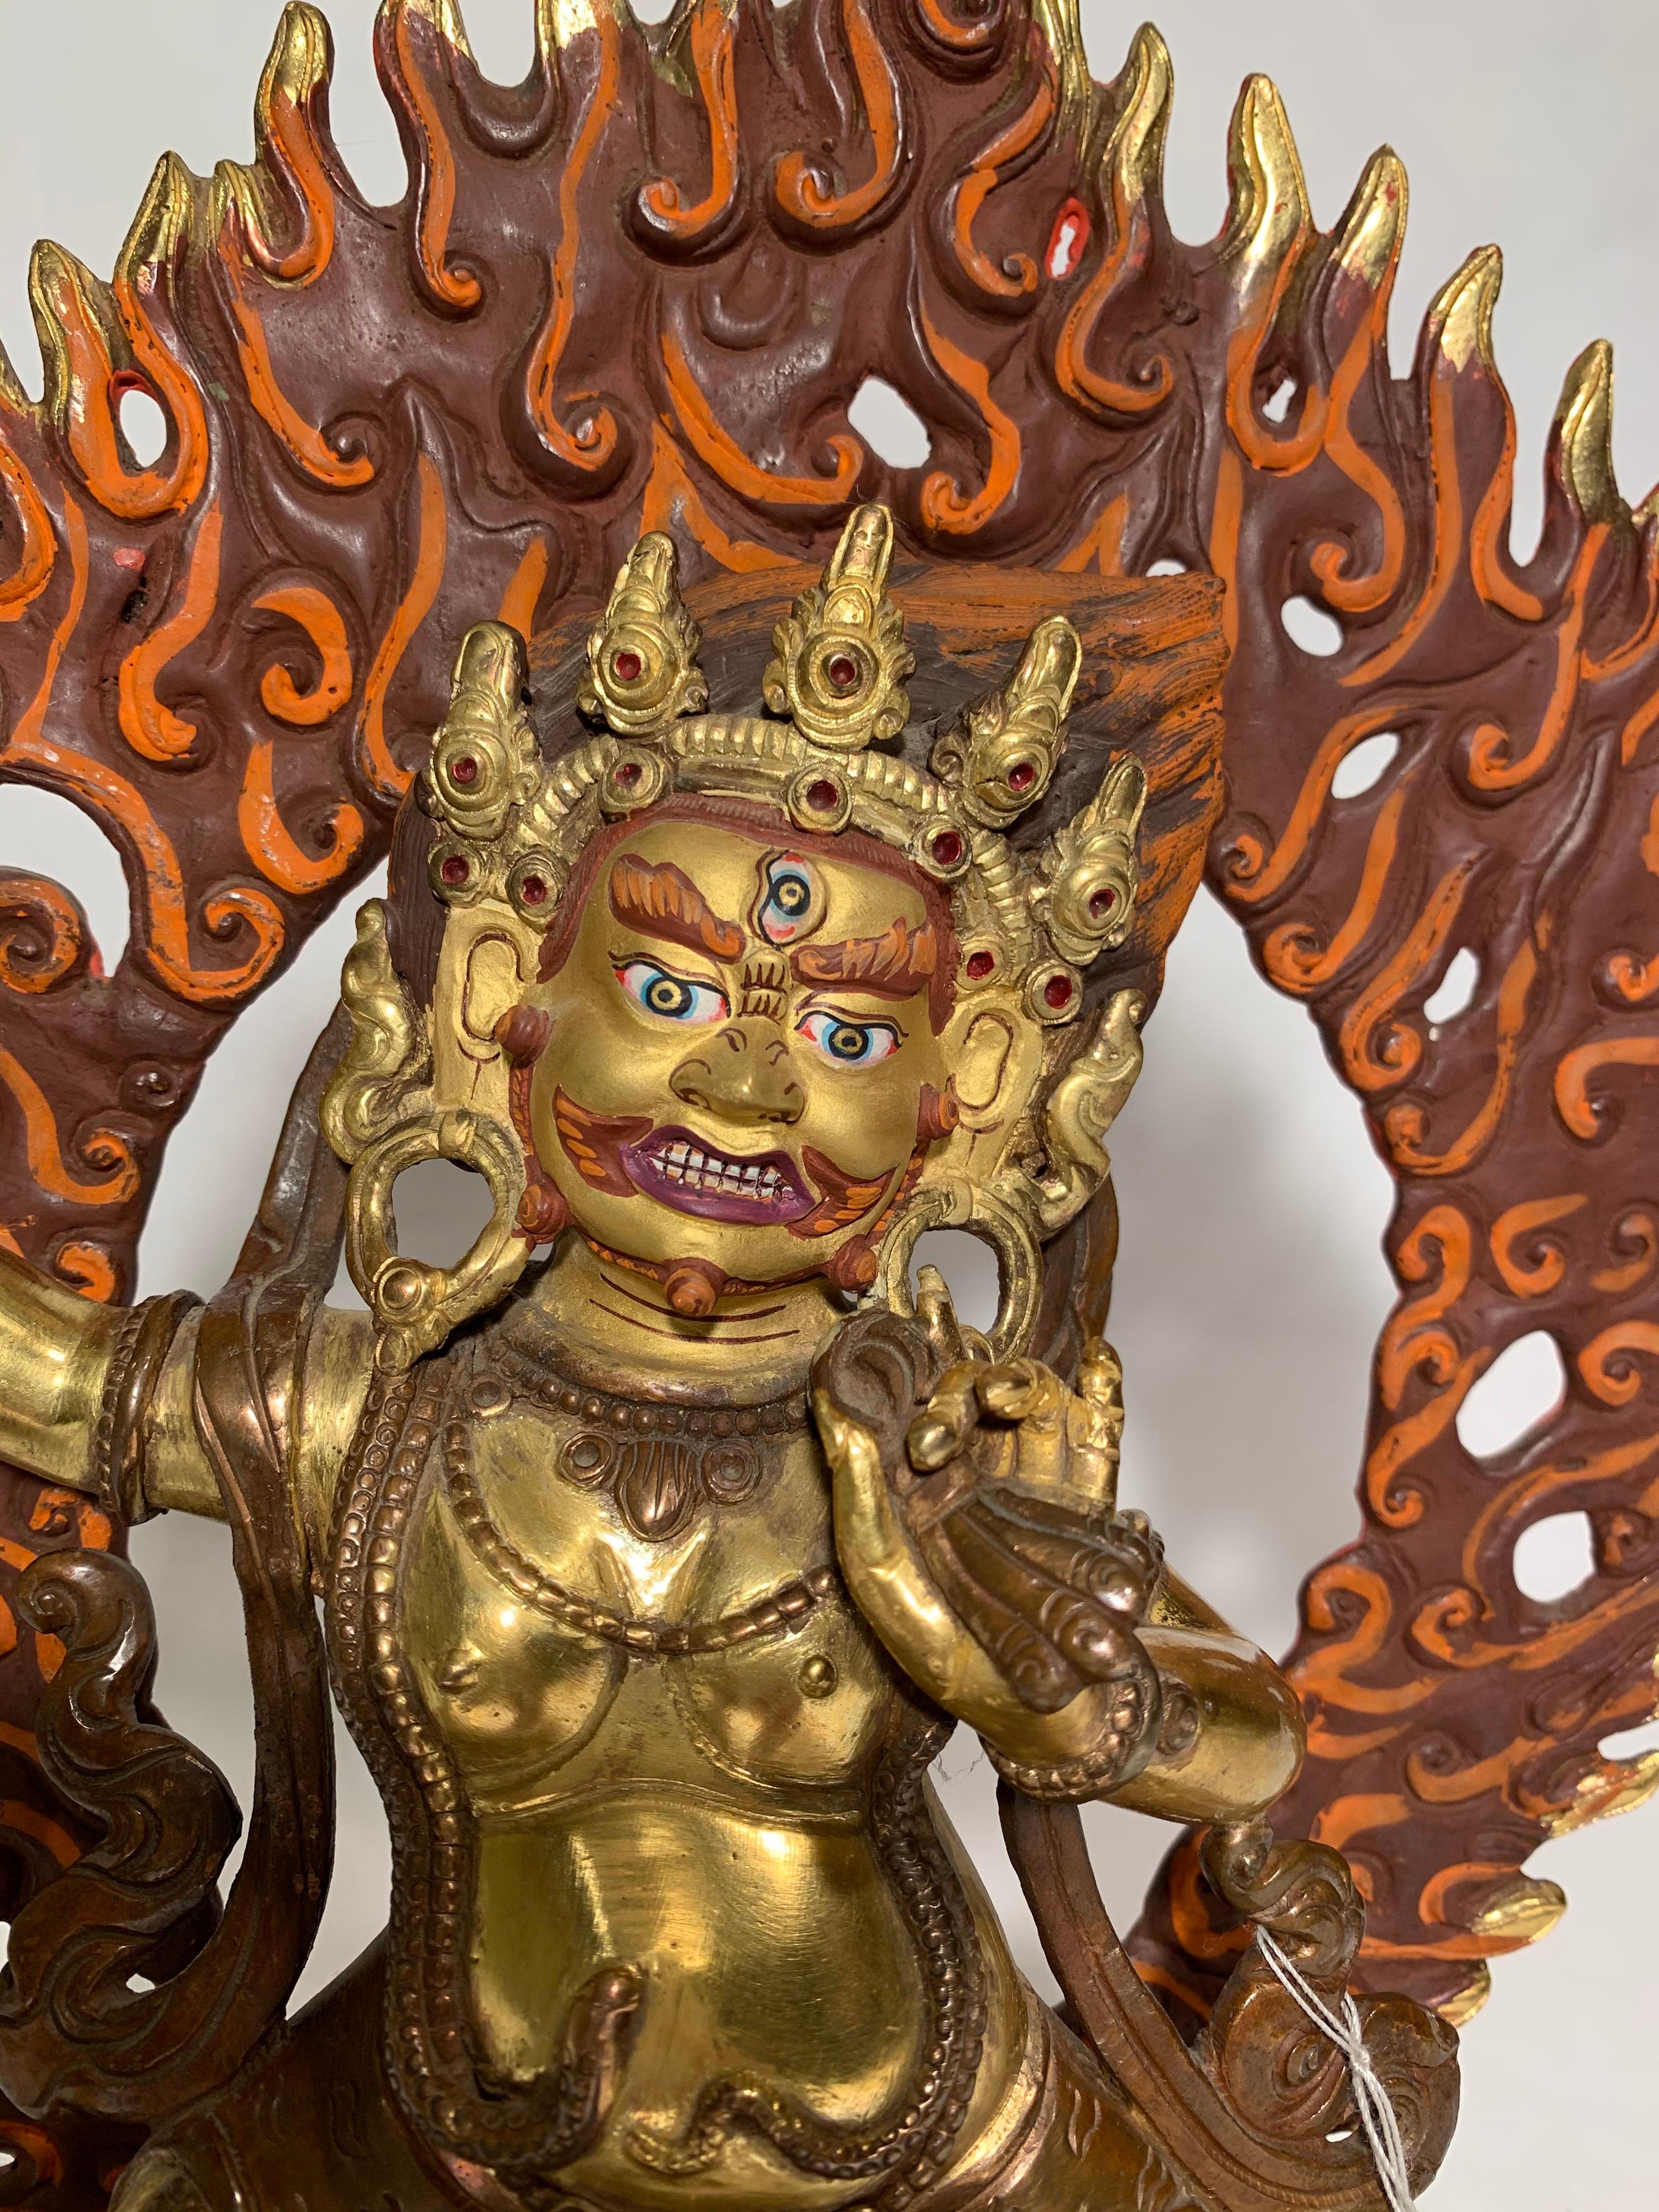 Vajrapani Statue 10 Inch with 24K Gold Handcrafted by Lost Wax Process - Brown Figurative Sculpture by Unknown